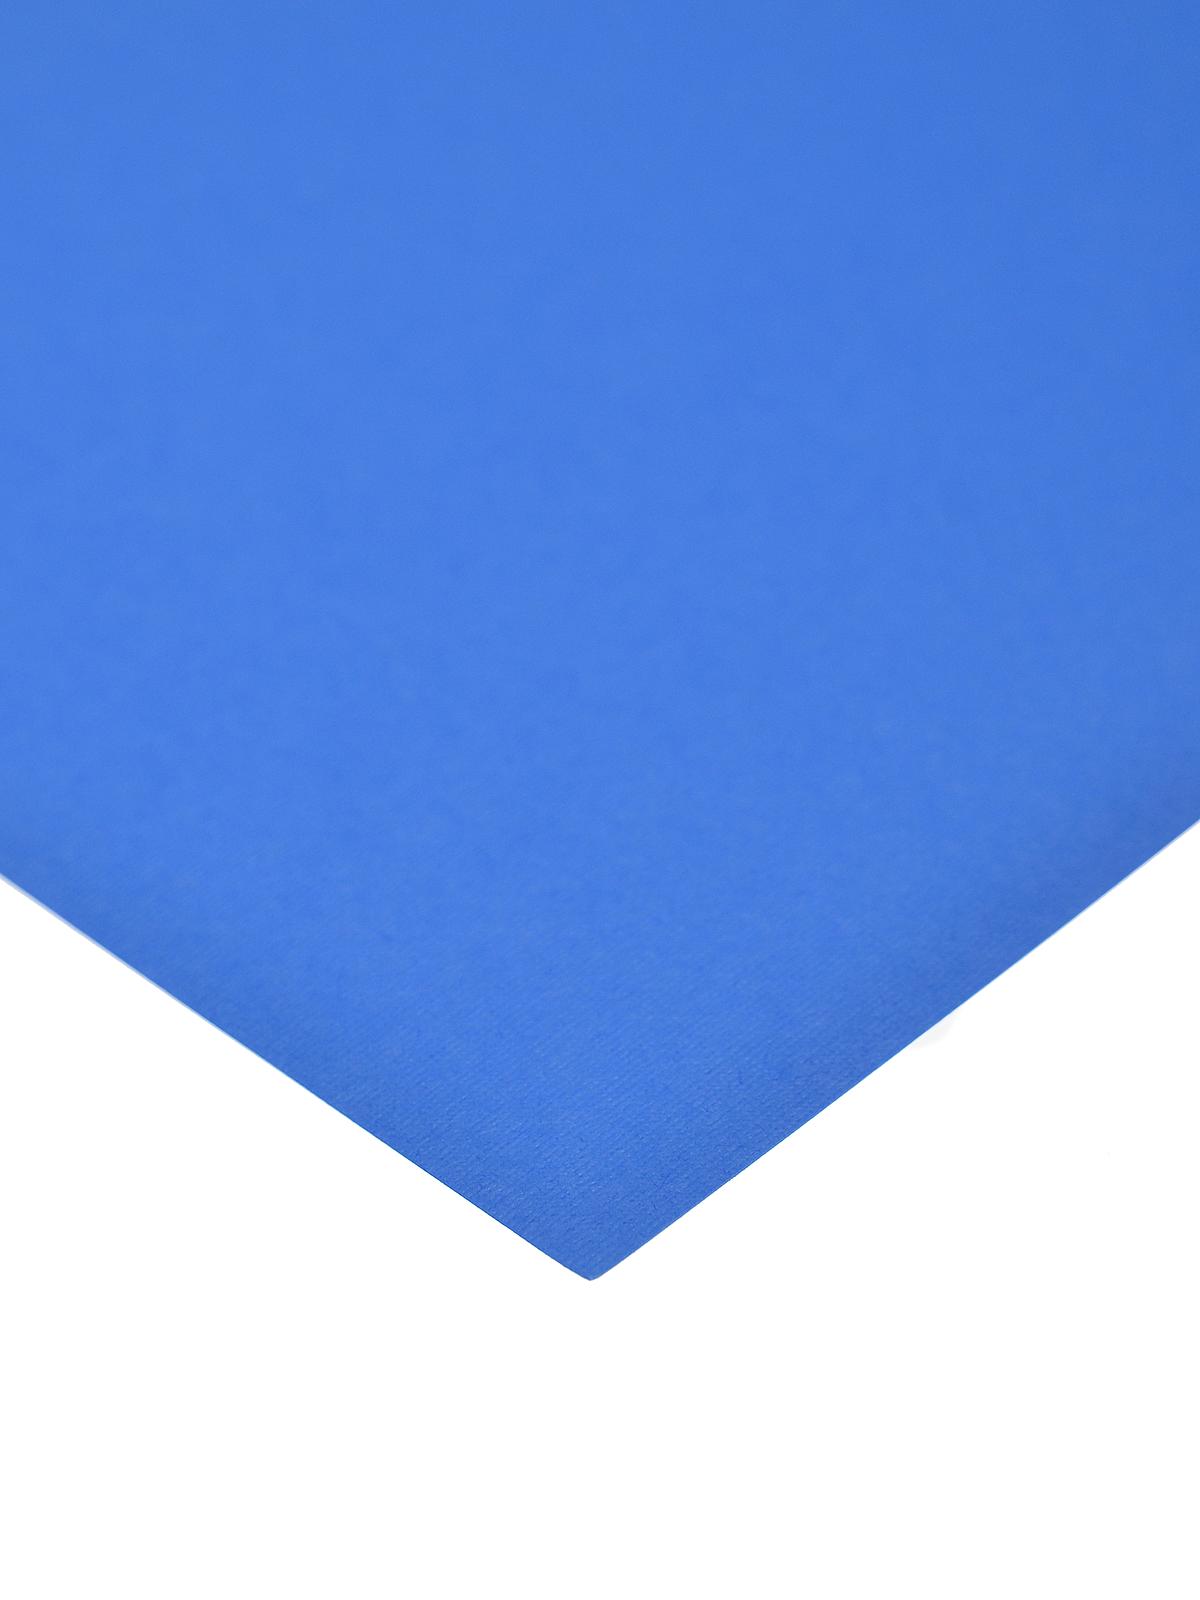 80 Lb. Canvas 8.5 In. X 11 In. Sheet Mosaic Blue